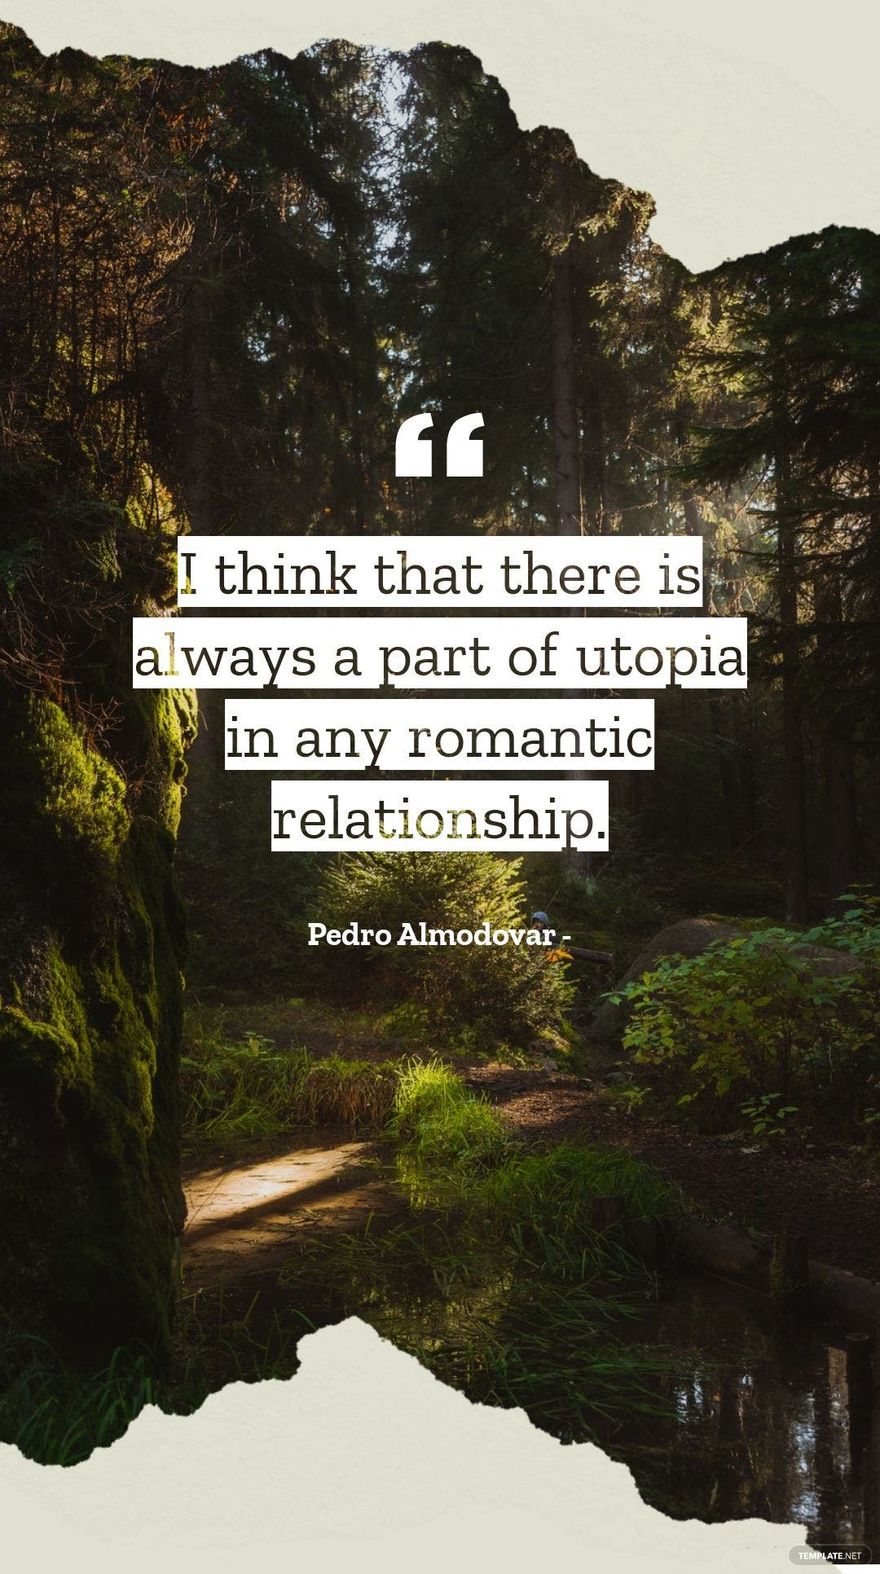 Pedro Almodovar - I think that there is always a part of utopia in any romantic relationship.